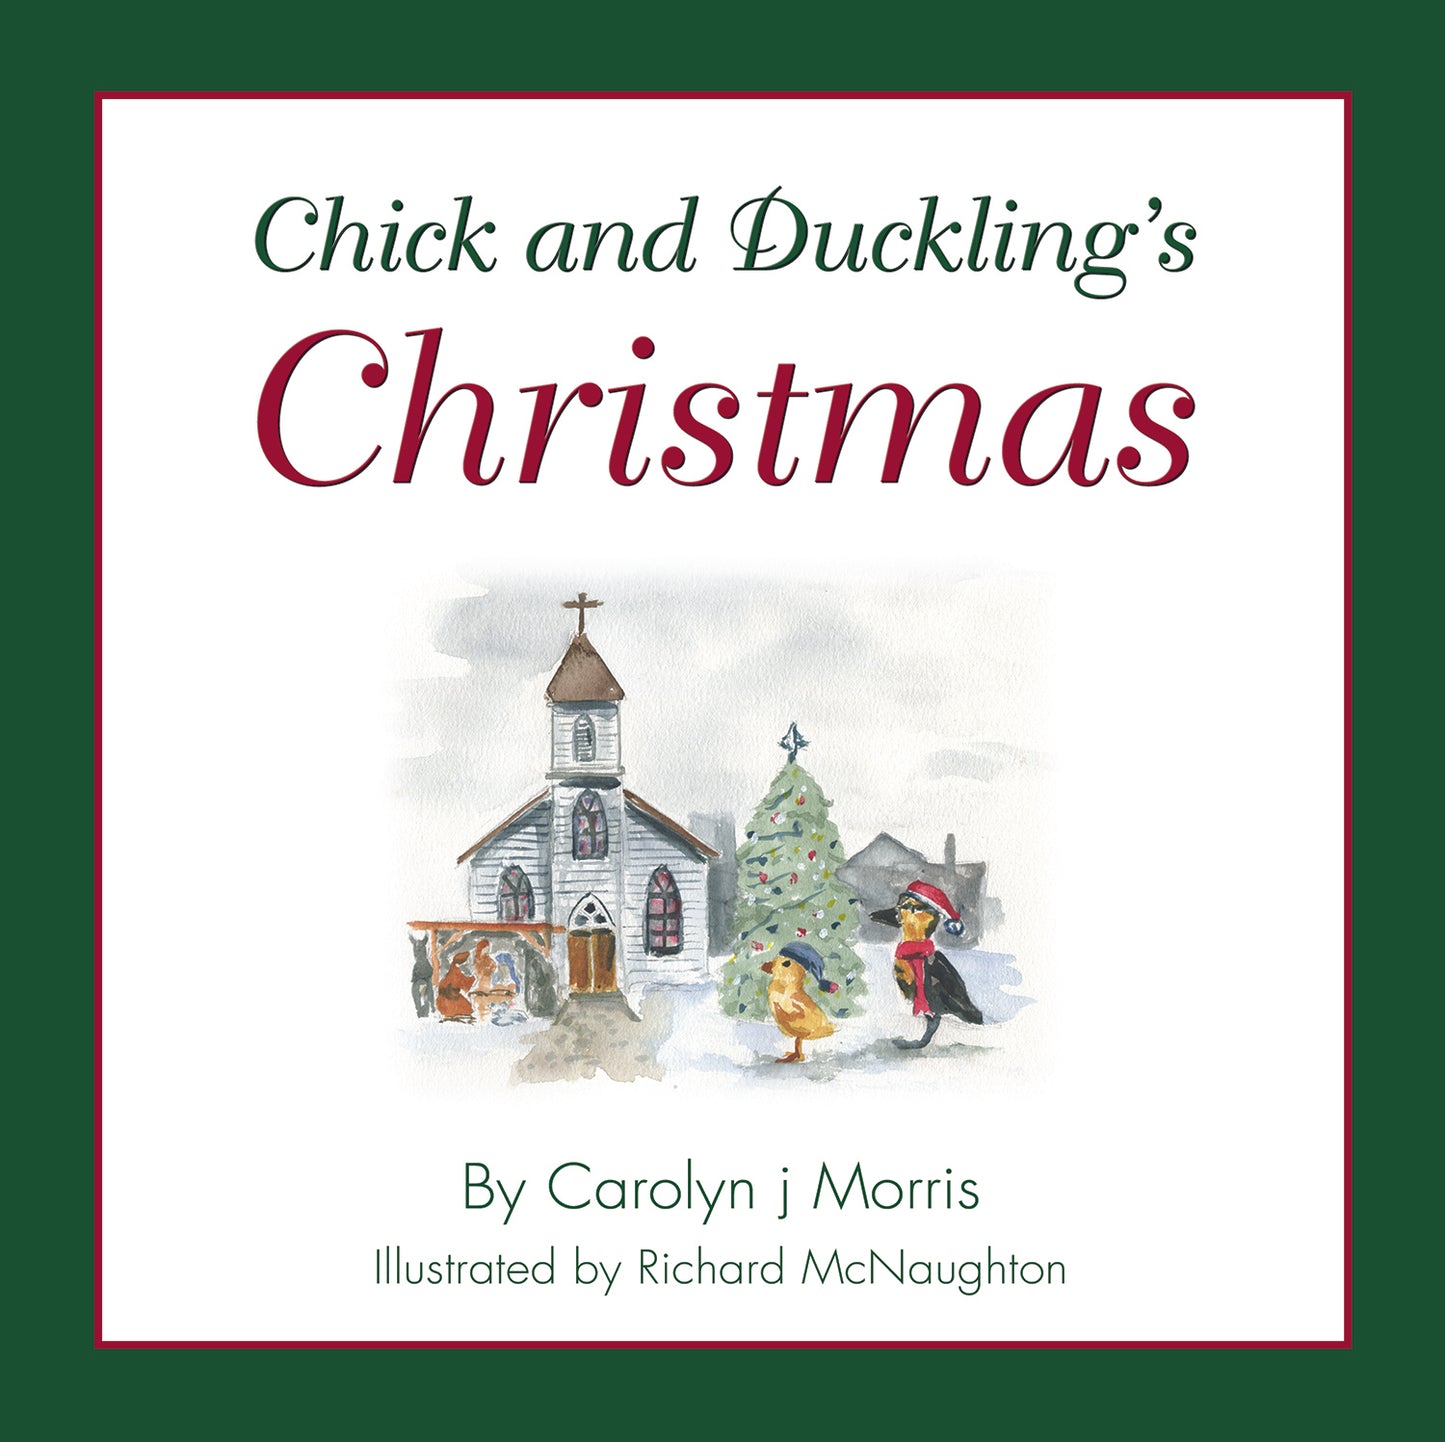 Chick and Duckling's Christmas